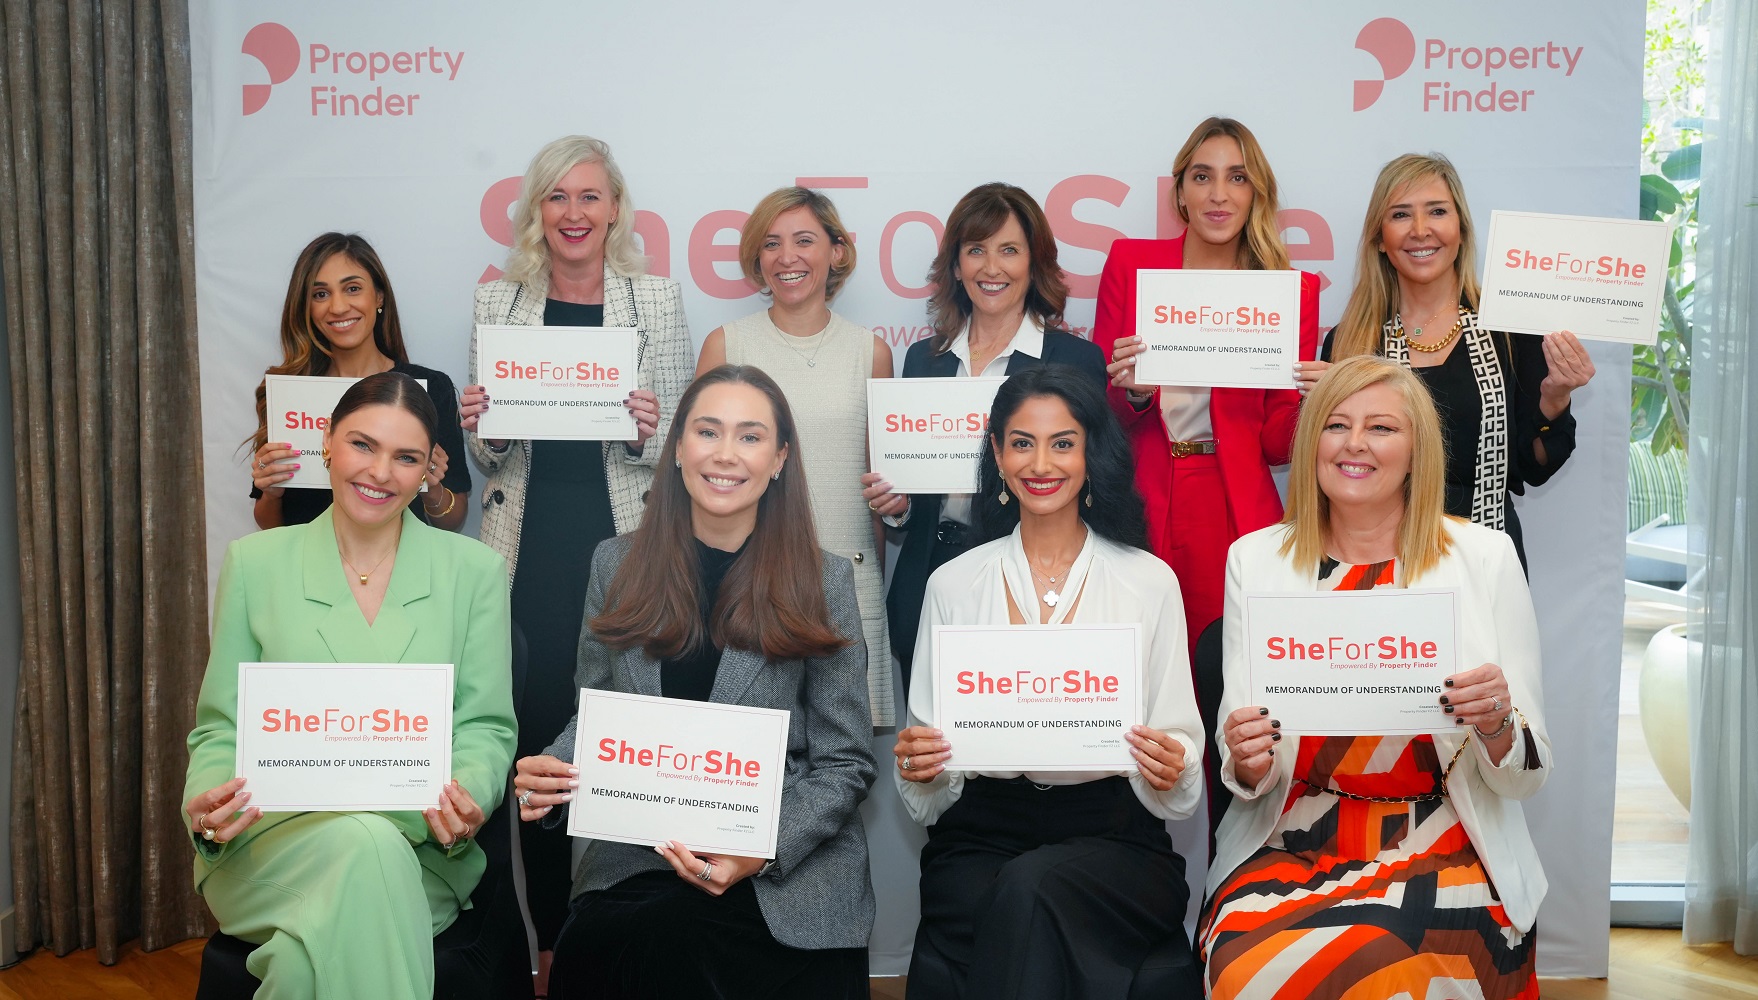 Property Finder Launches Initiative to Empower Women in Real Estate